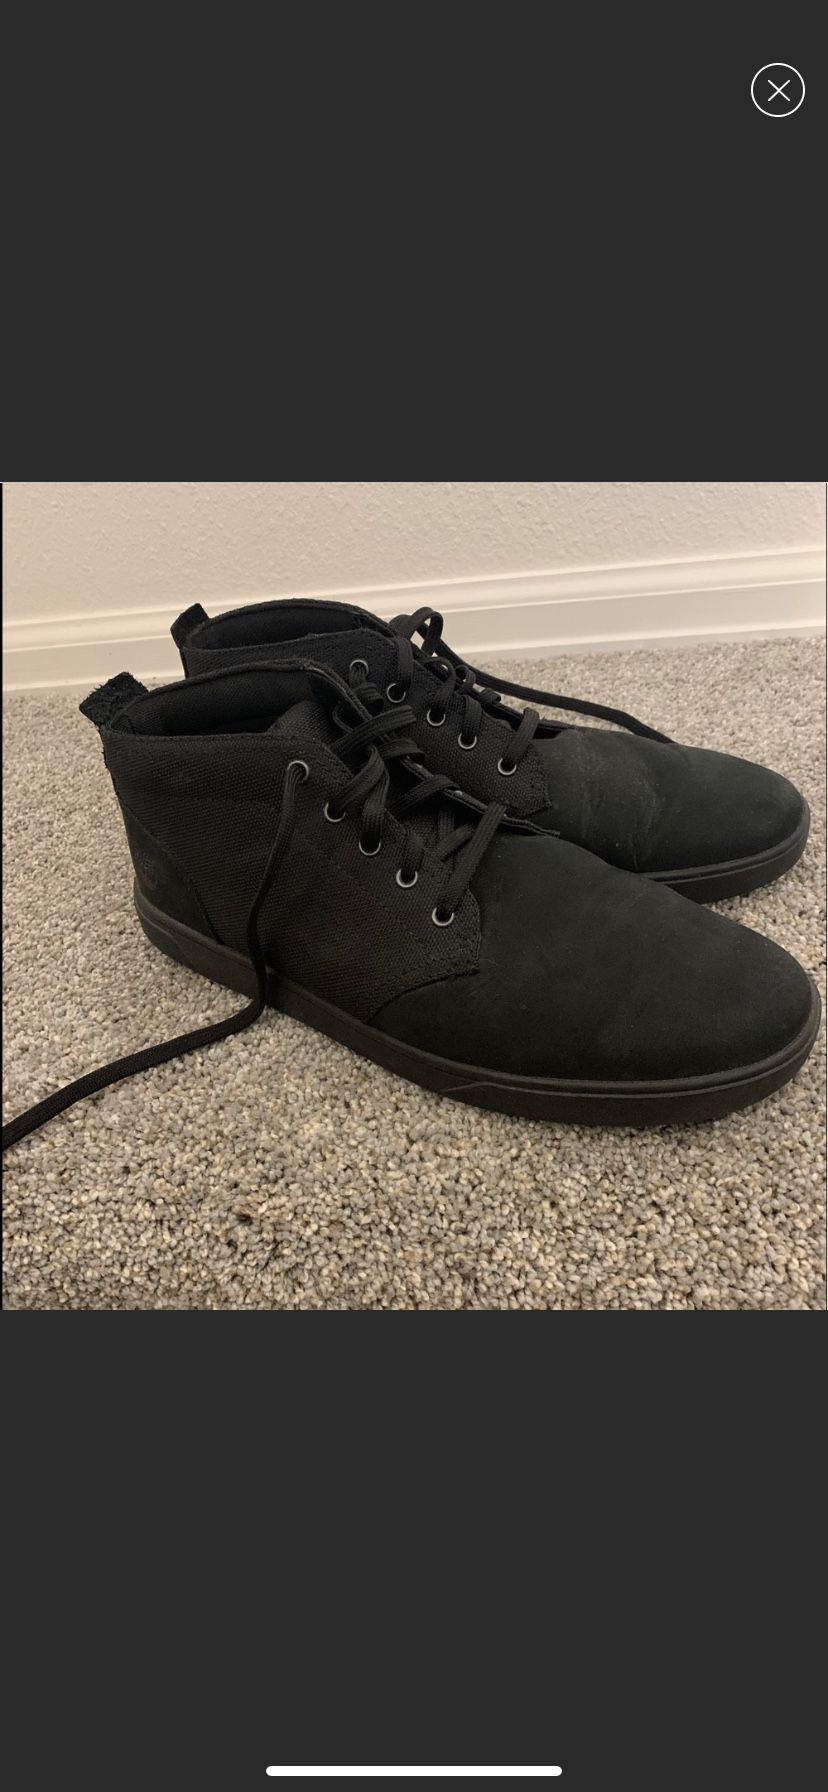 Timberlands Earthkeeper Black Suede Ankle Shoes Size 10